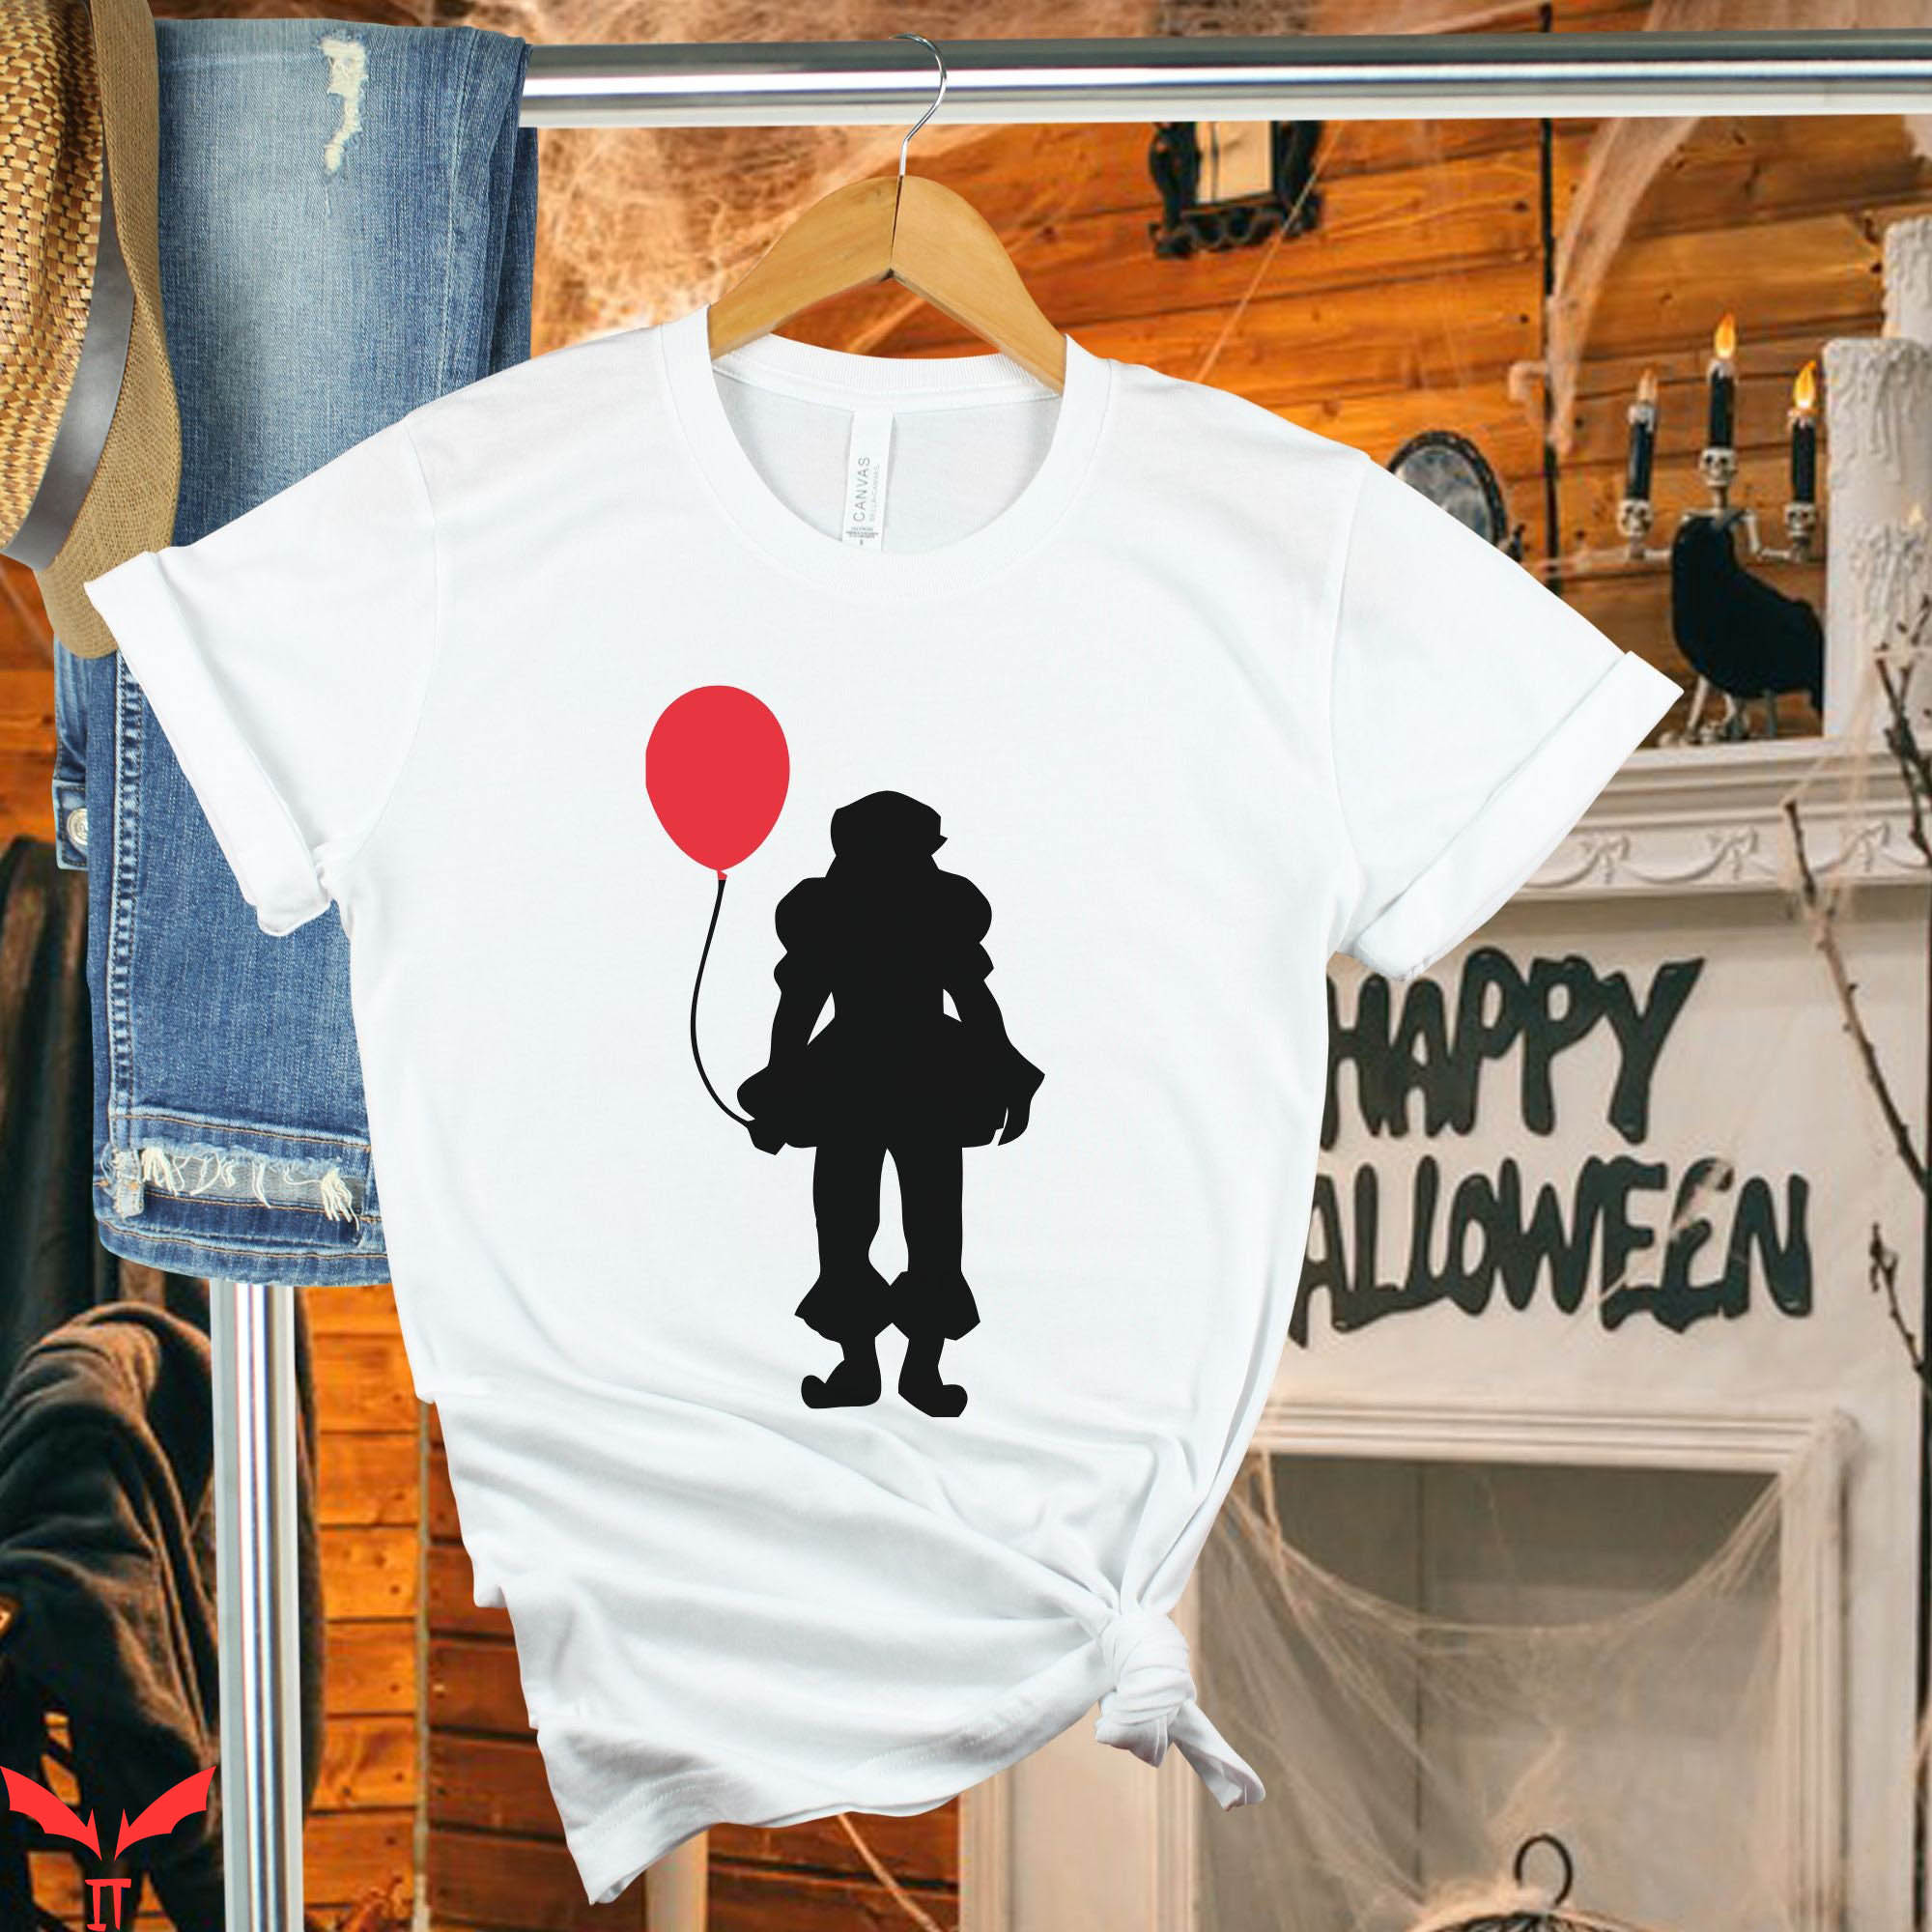 IT Pennywise T-Shirt Silhouette Scary Clown Red Balloon